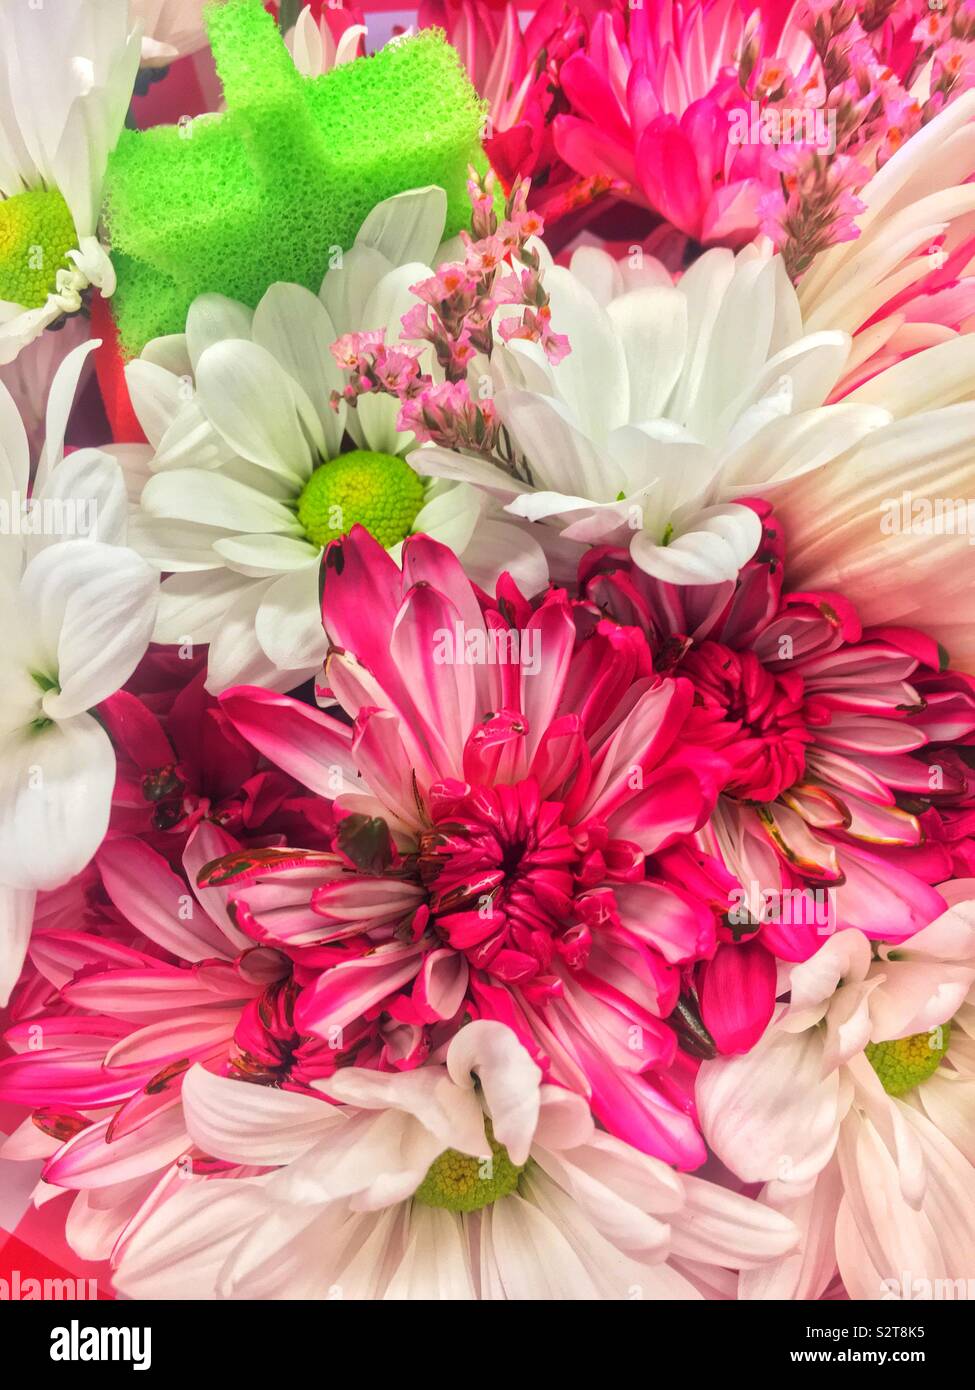 Beautiful bouquet of fresh summer flowers and a green star sponge. Stock Photo